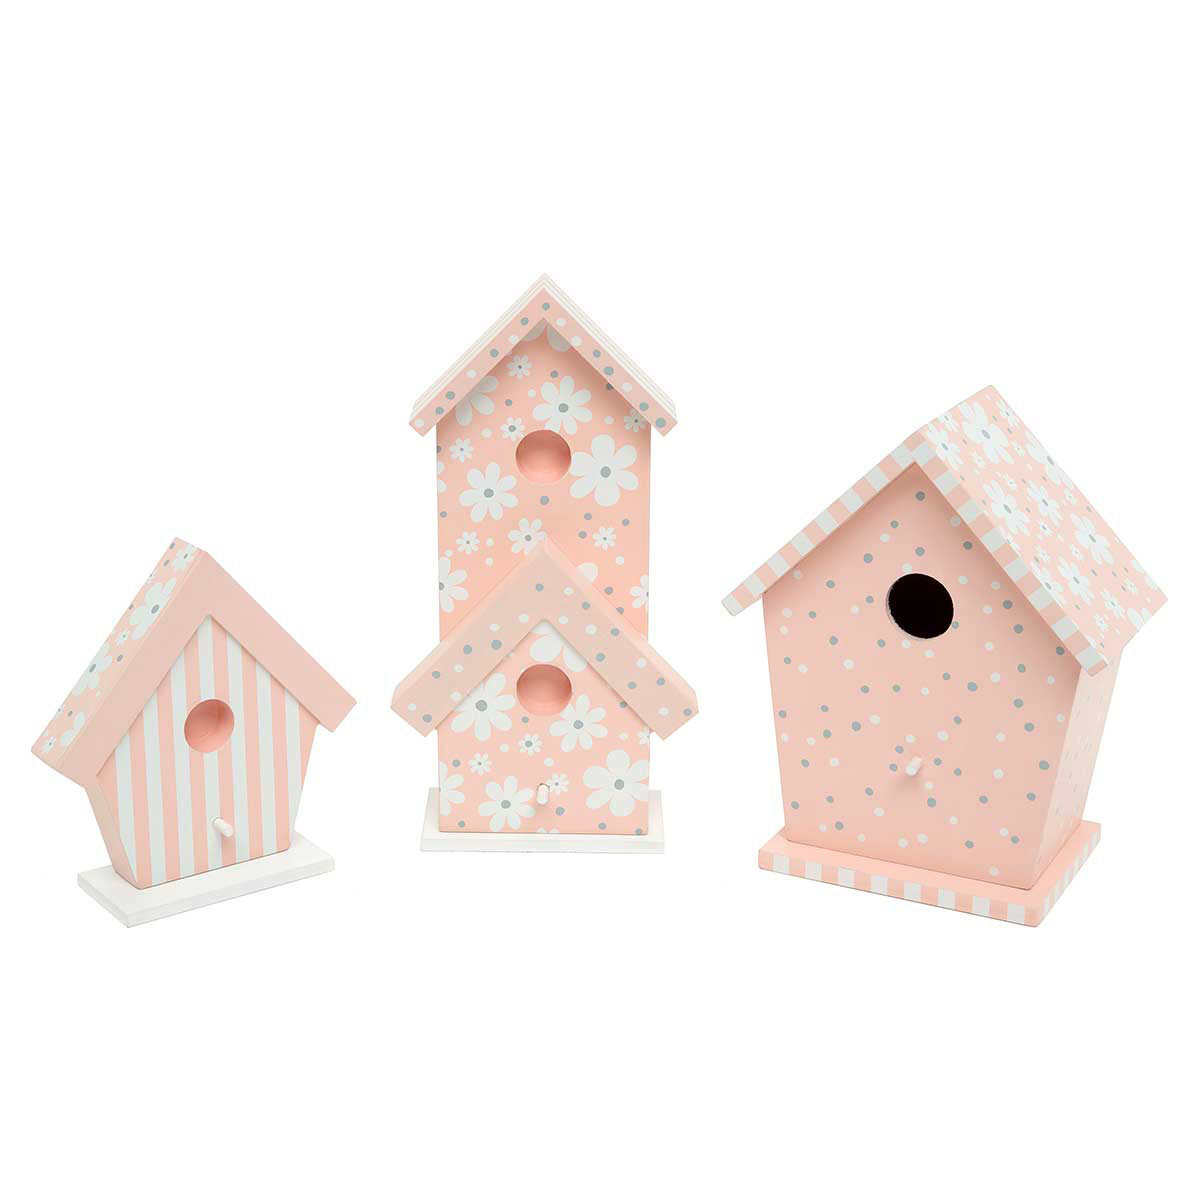 b50 BIRDHOUSE WHOOPSIE FLORA CONDO 5.5IN X 2.5IN X 10IN WOOD - Click Image to Close